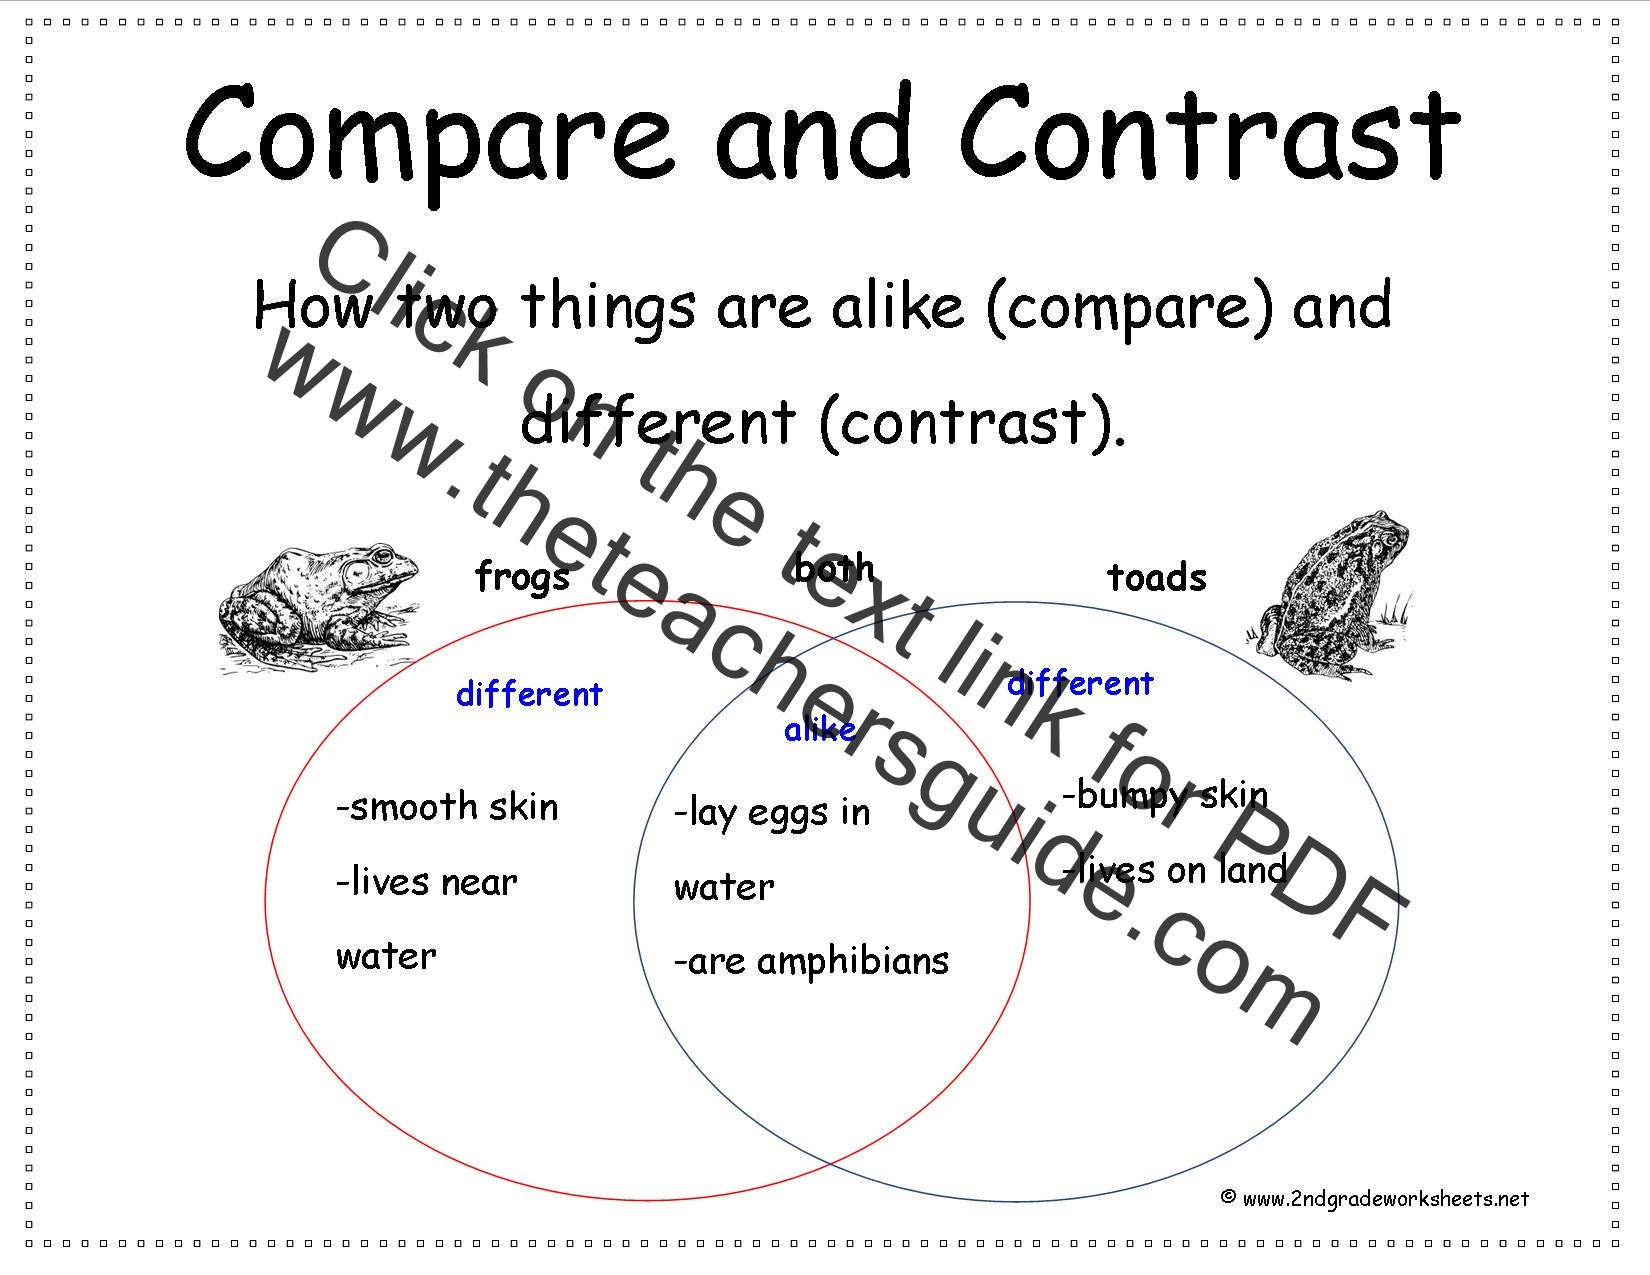 Sample of a compare and contrast thesis statement